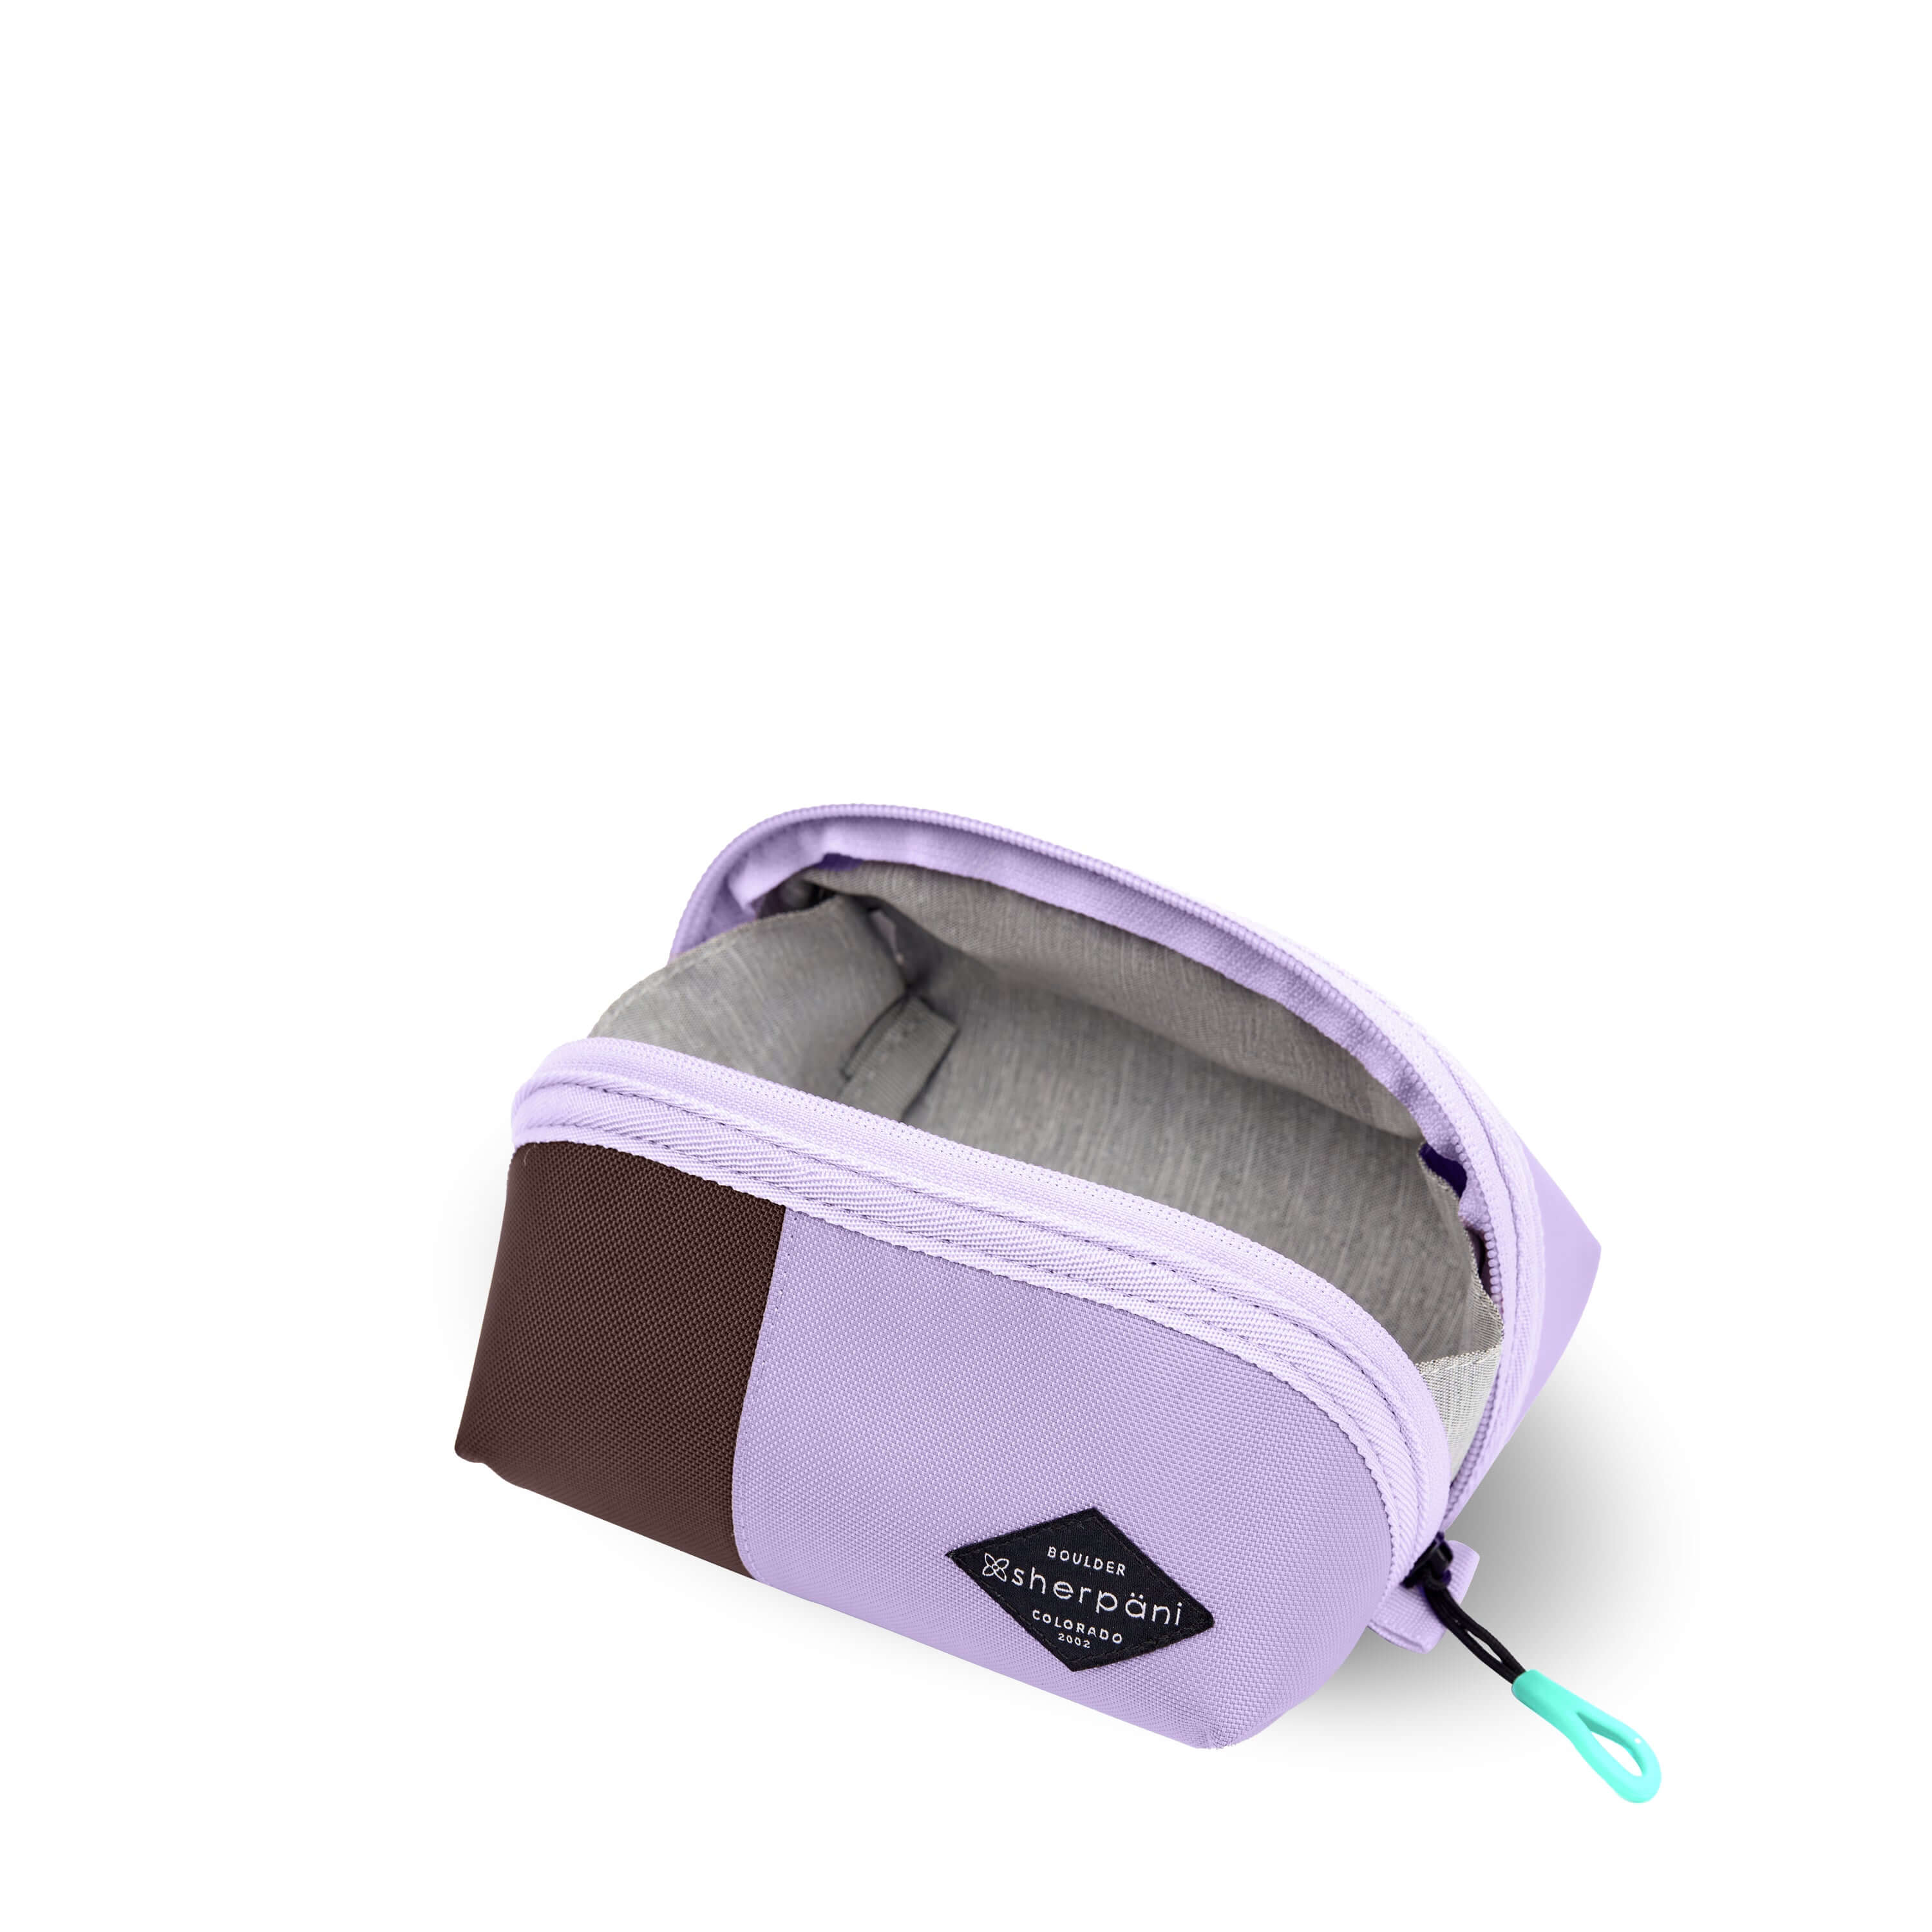 Top view of Sherpani travel accessory the Harmony in Lavender. The pouch is unzipped to reveal a light gray interior.